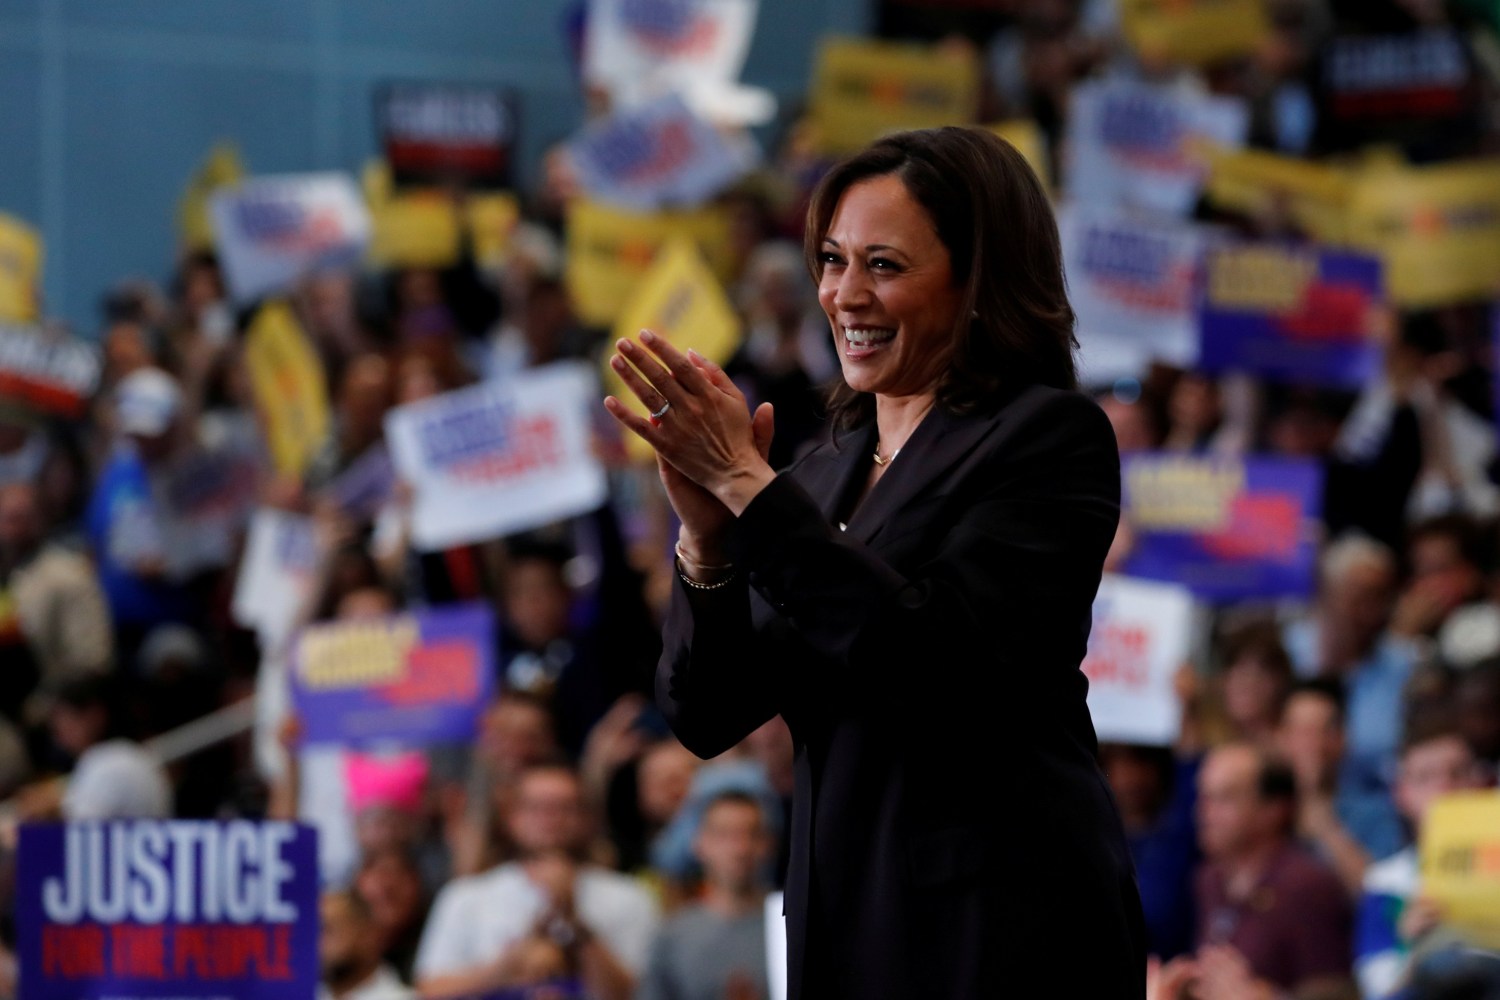 FILE PHOTO: U.S. Senator Kamala Harris holds her first organizing event in Los Angeles as she campaigns in the 2020 Democratic presidential nomination race in Los Angeles, California, U.S., May 19, 2019.  REUTERS/Mike Blake/File Photo